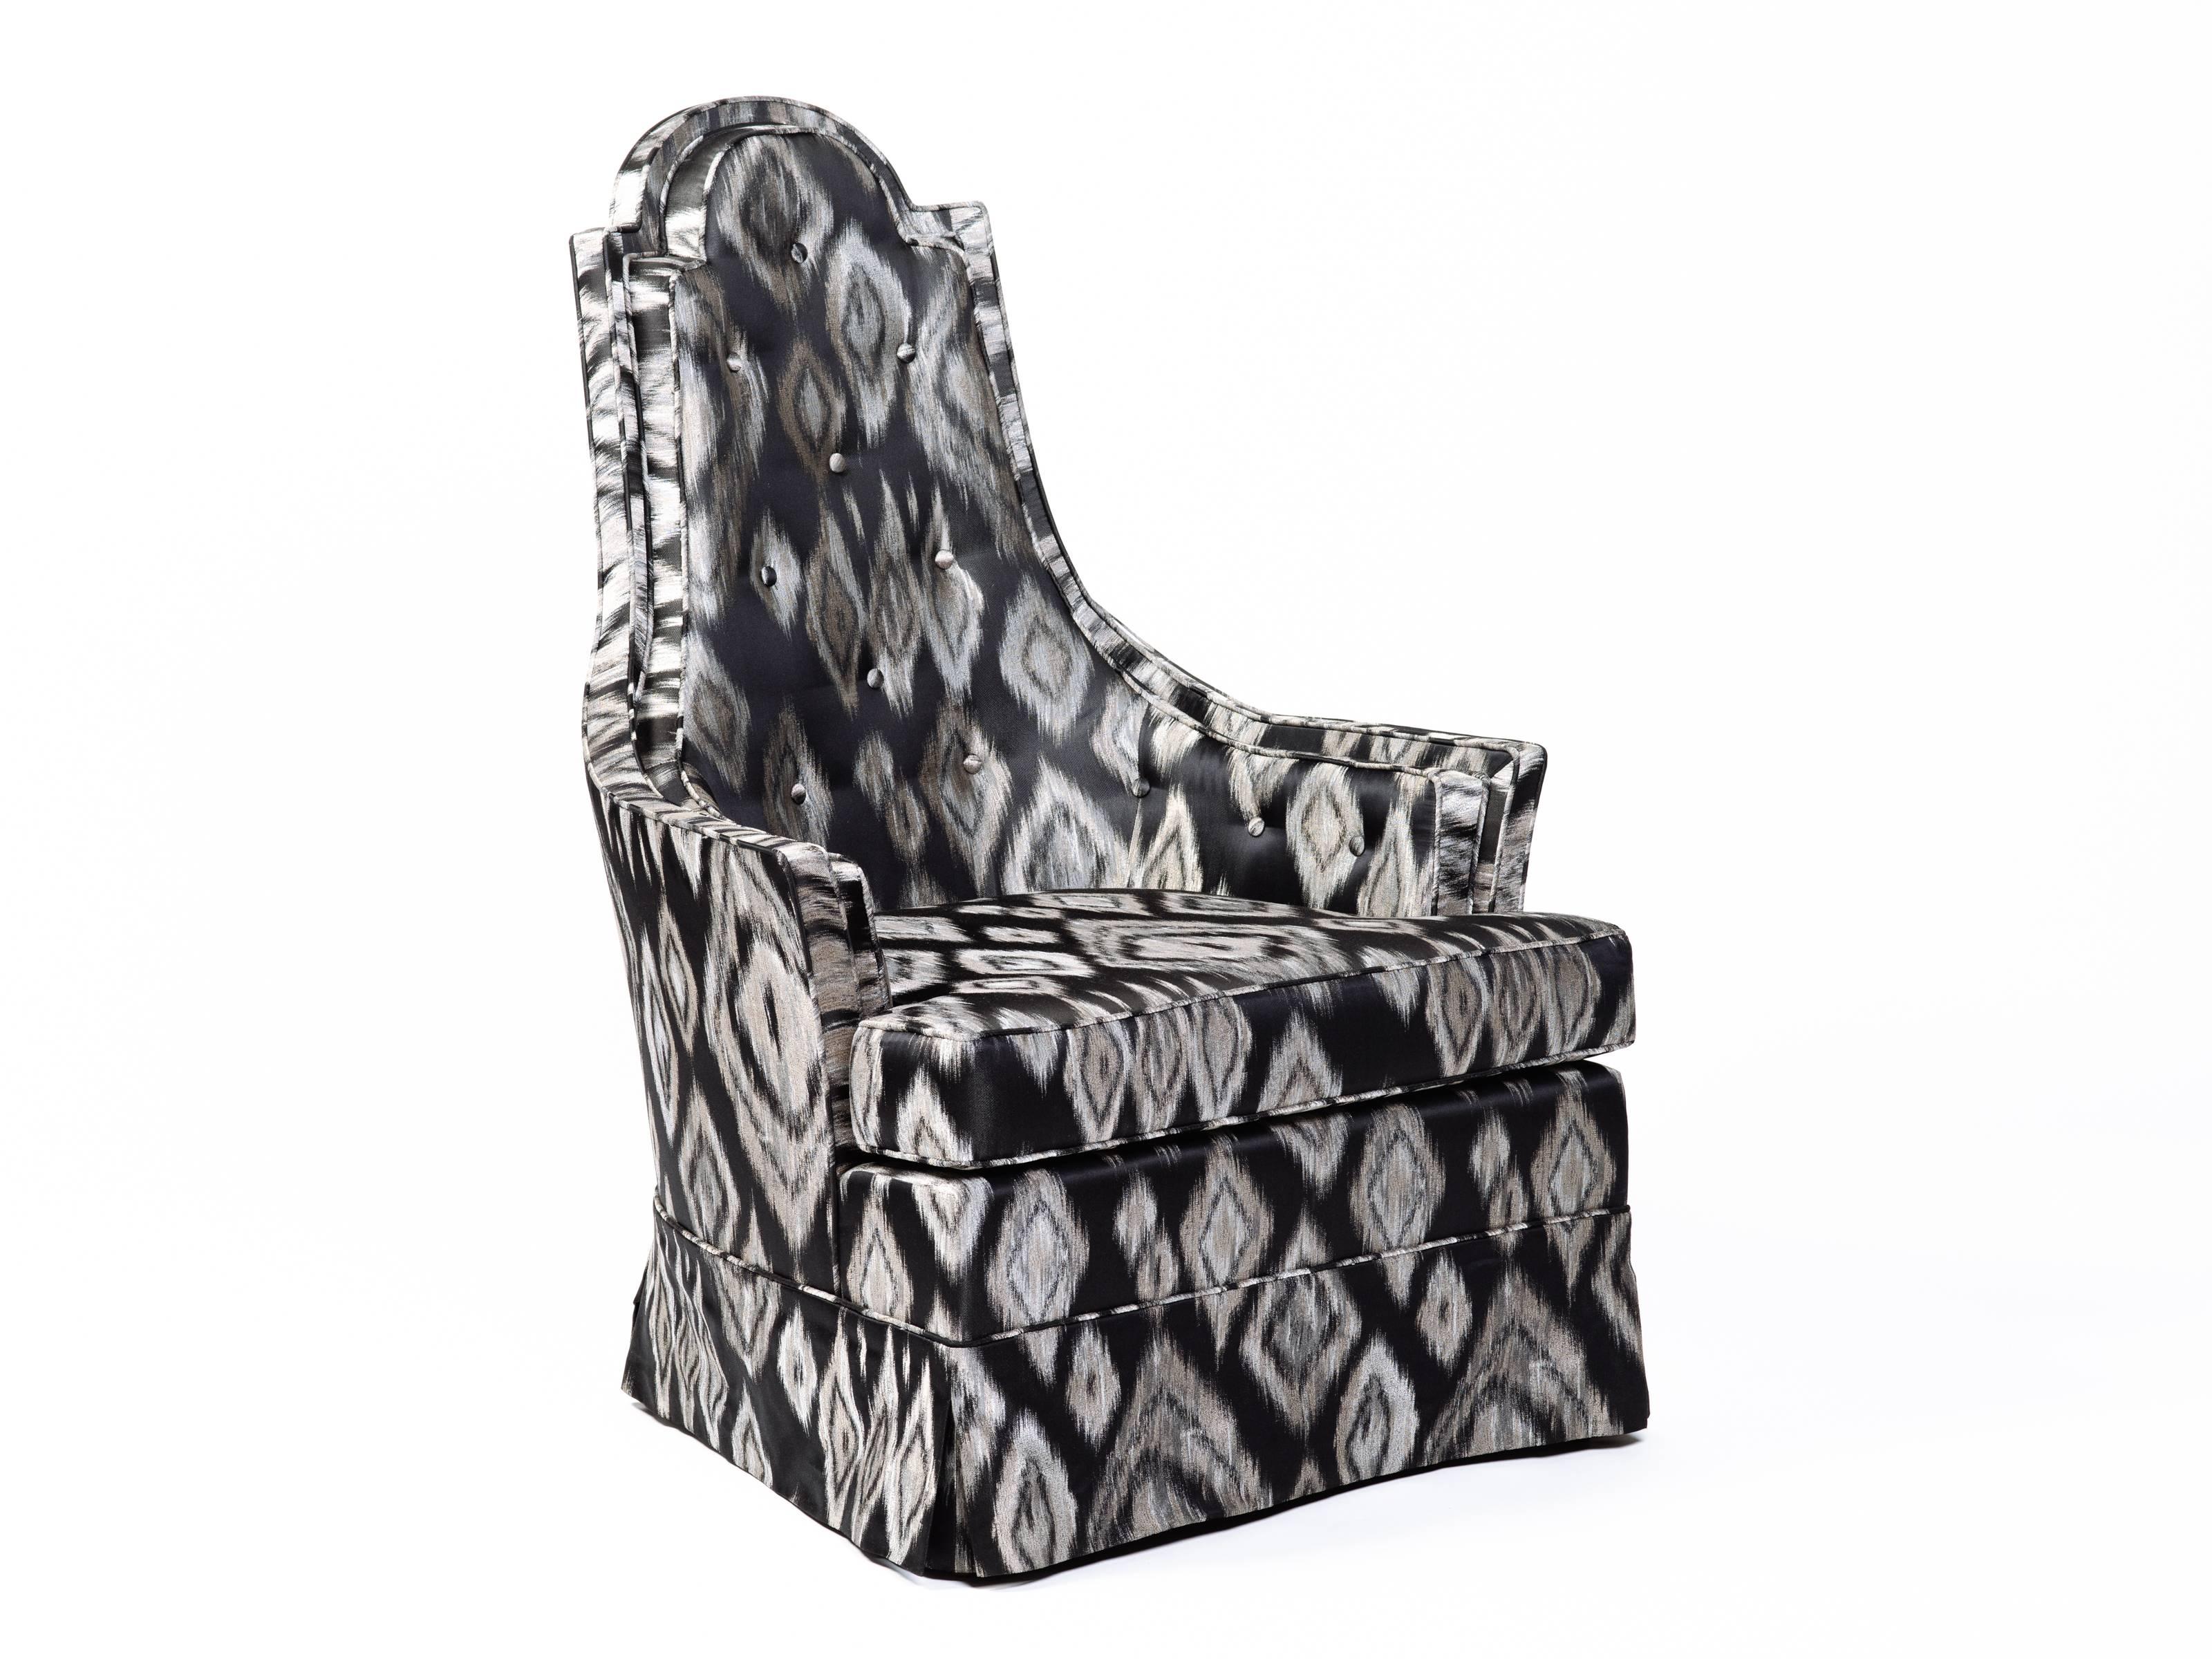 Pair of Mid-Century Modern armchairs with sculptural high back design. Newly upholstered in graphic black and platinum Ikat silk fabric with geometric print. Chairs have tall shield shaped backs with a gorgeous profile. Features button back accents